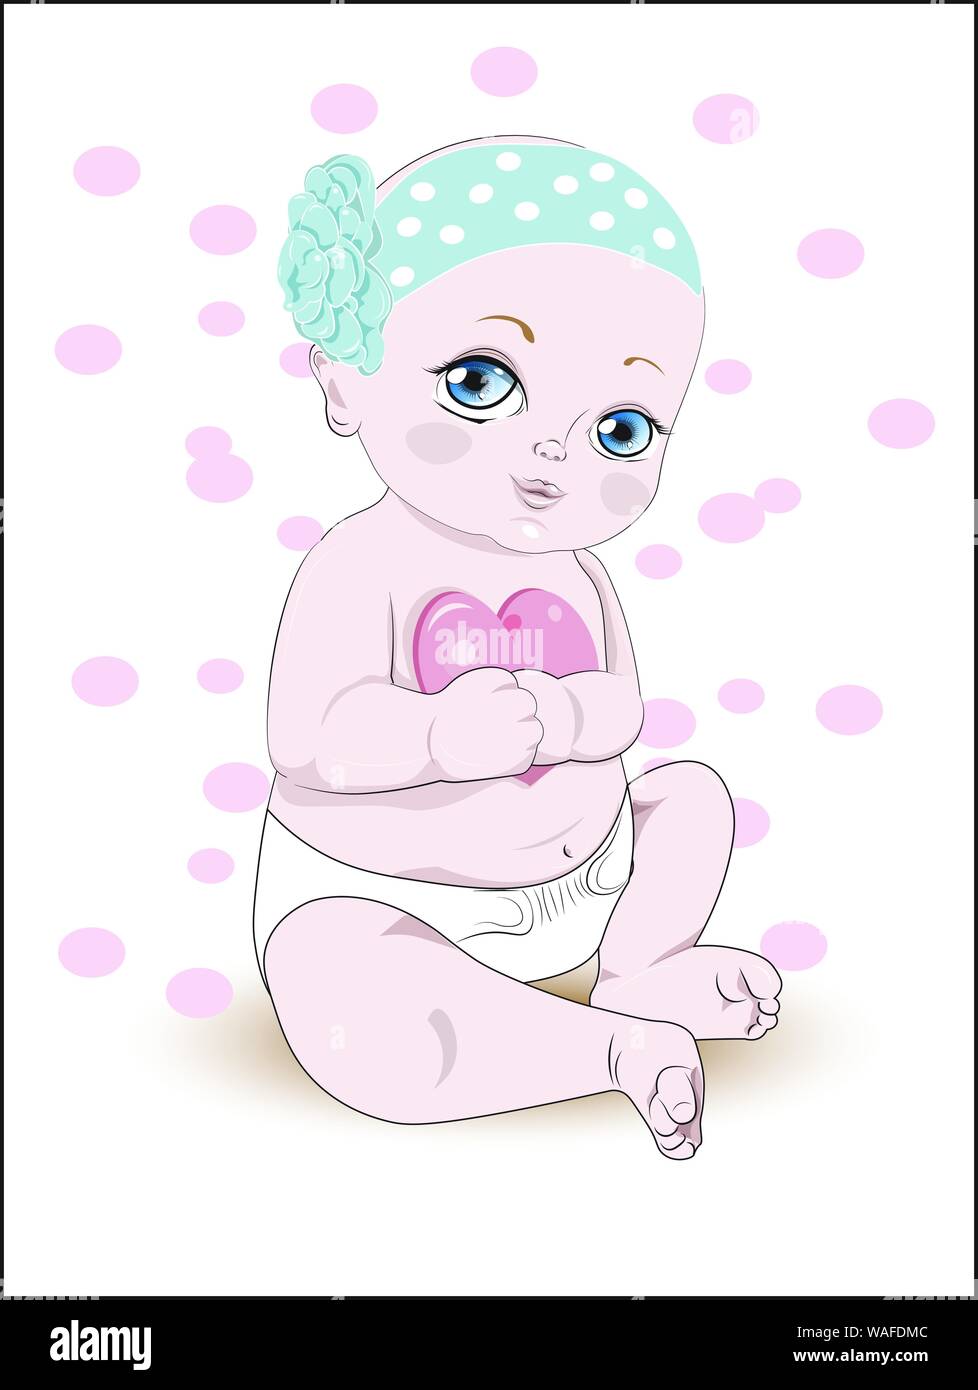 the bald baby with blue eyes, the boy or the girl, sits in a diaper, with heart Stock Vector